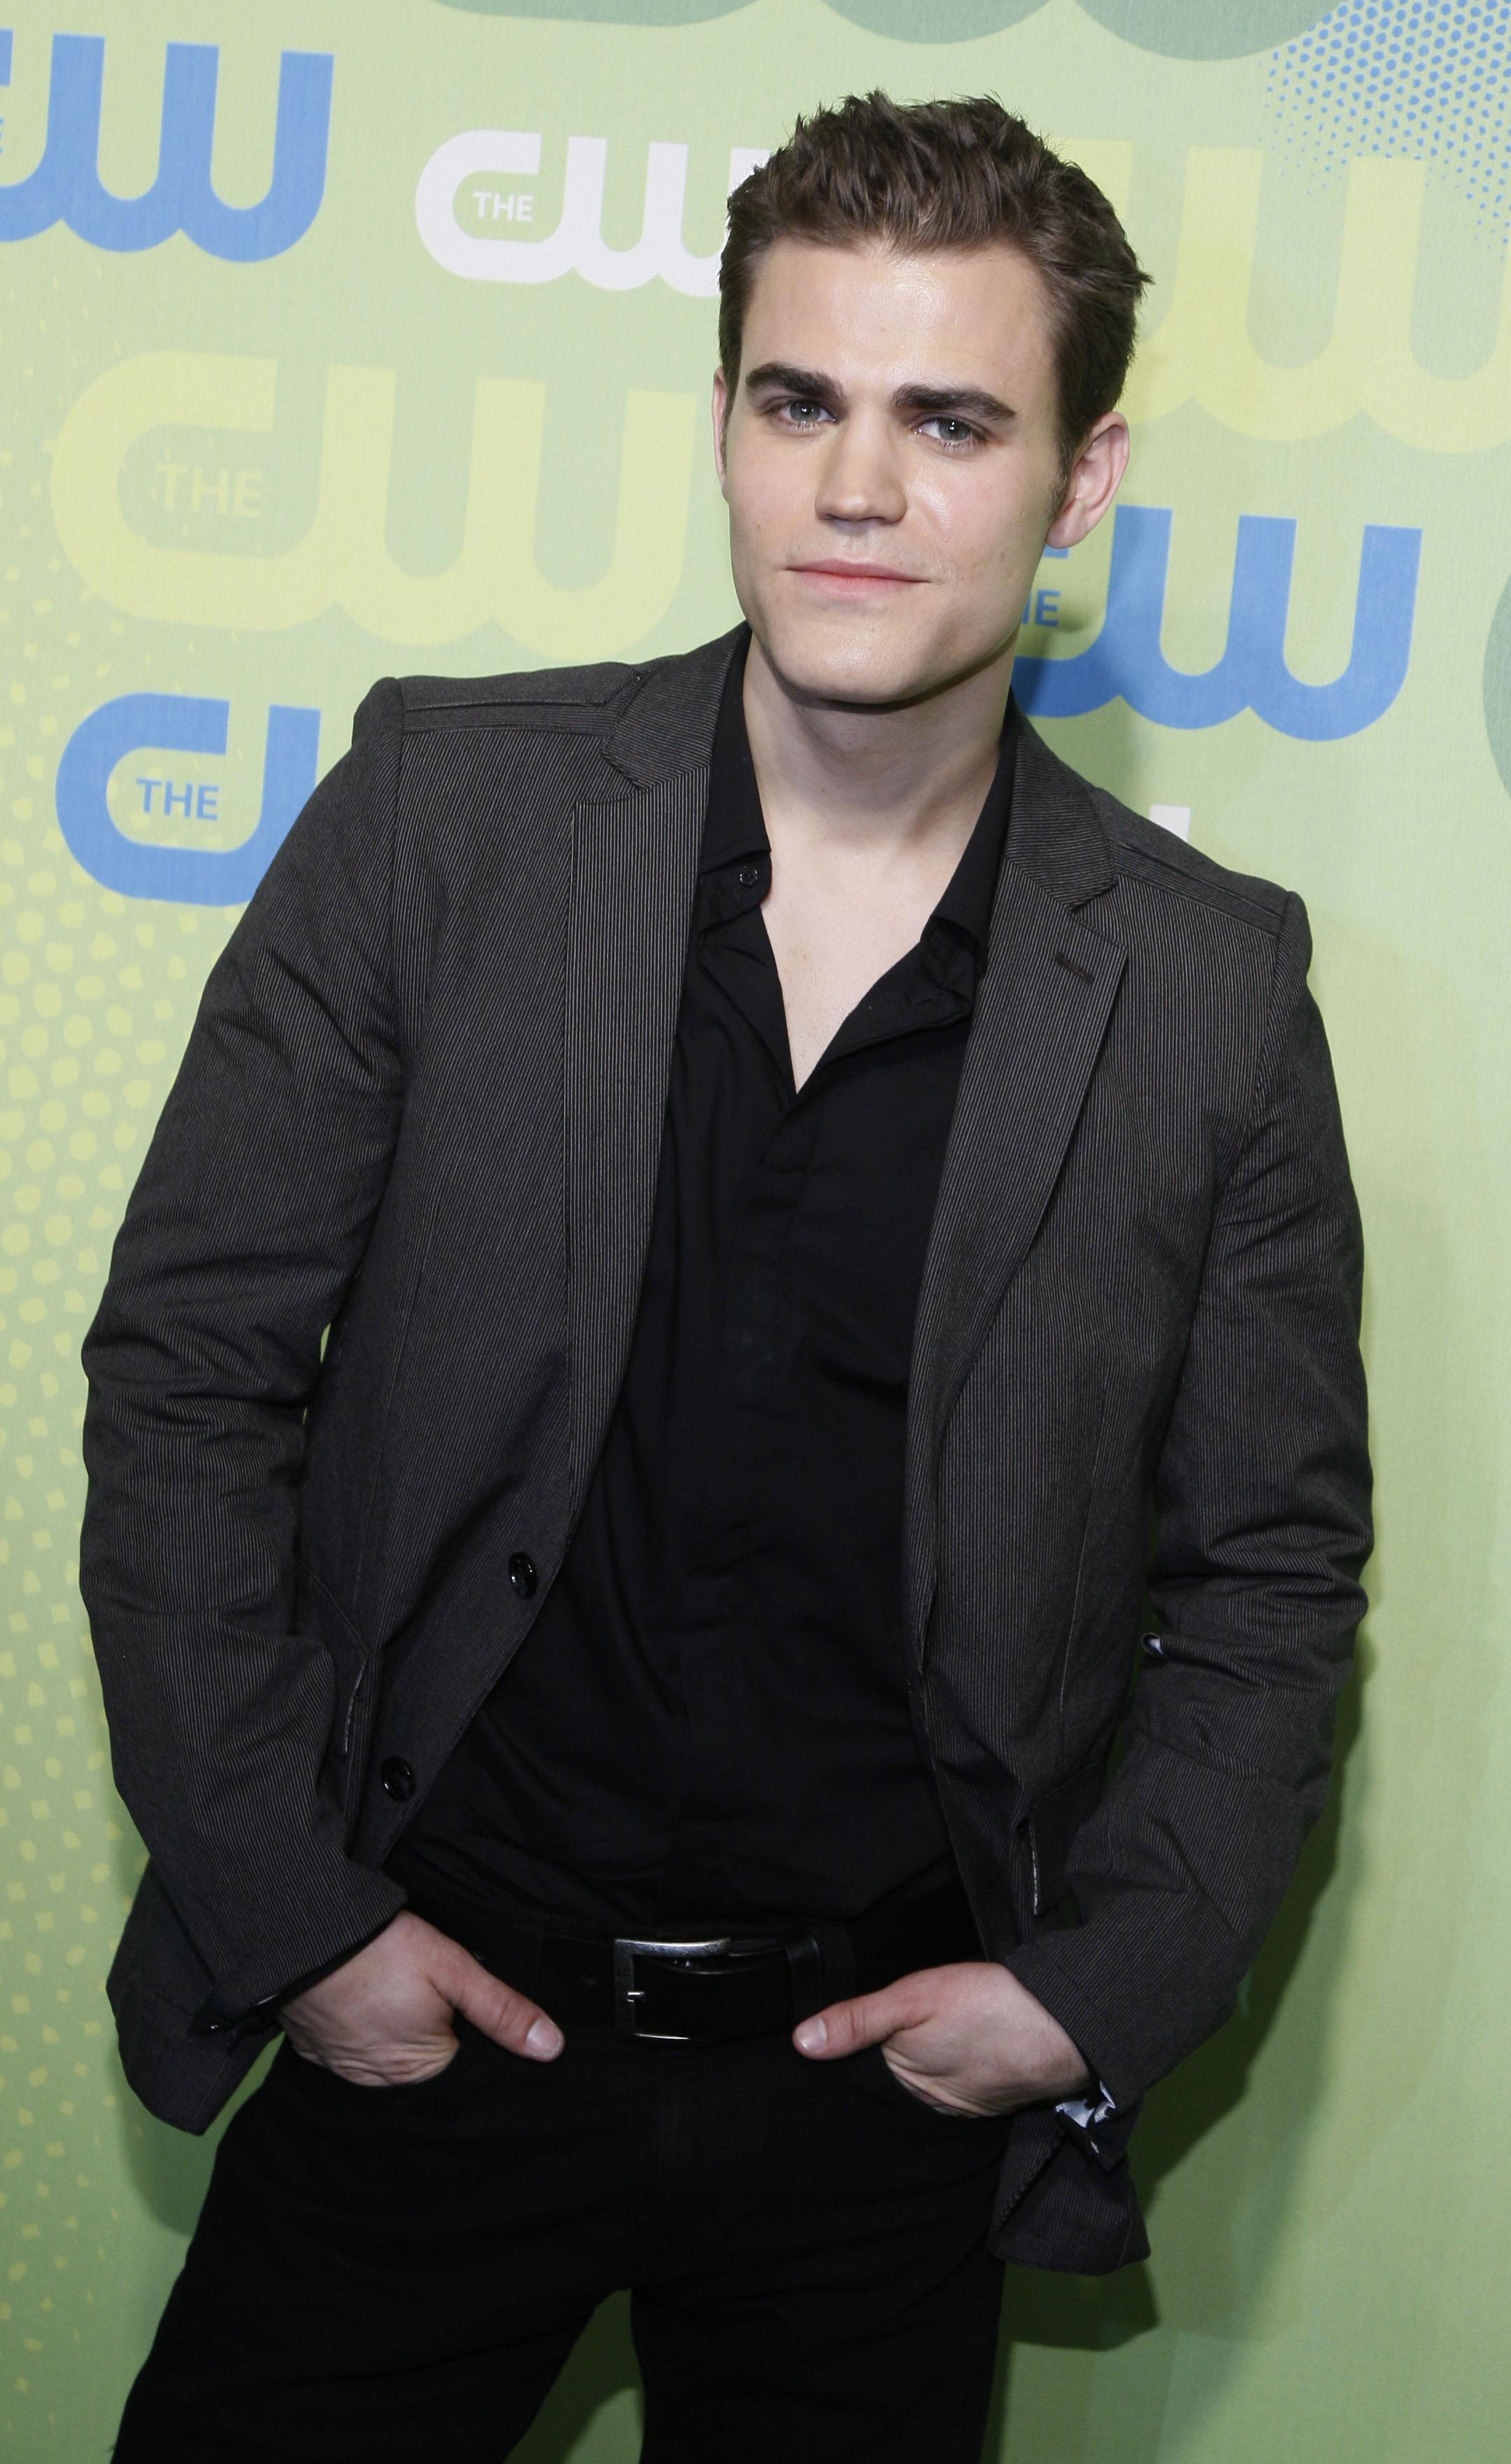 Paul Wesley's Transformation From 'Vampire Diaries' to Now: Photos